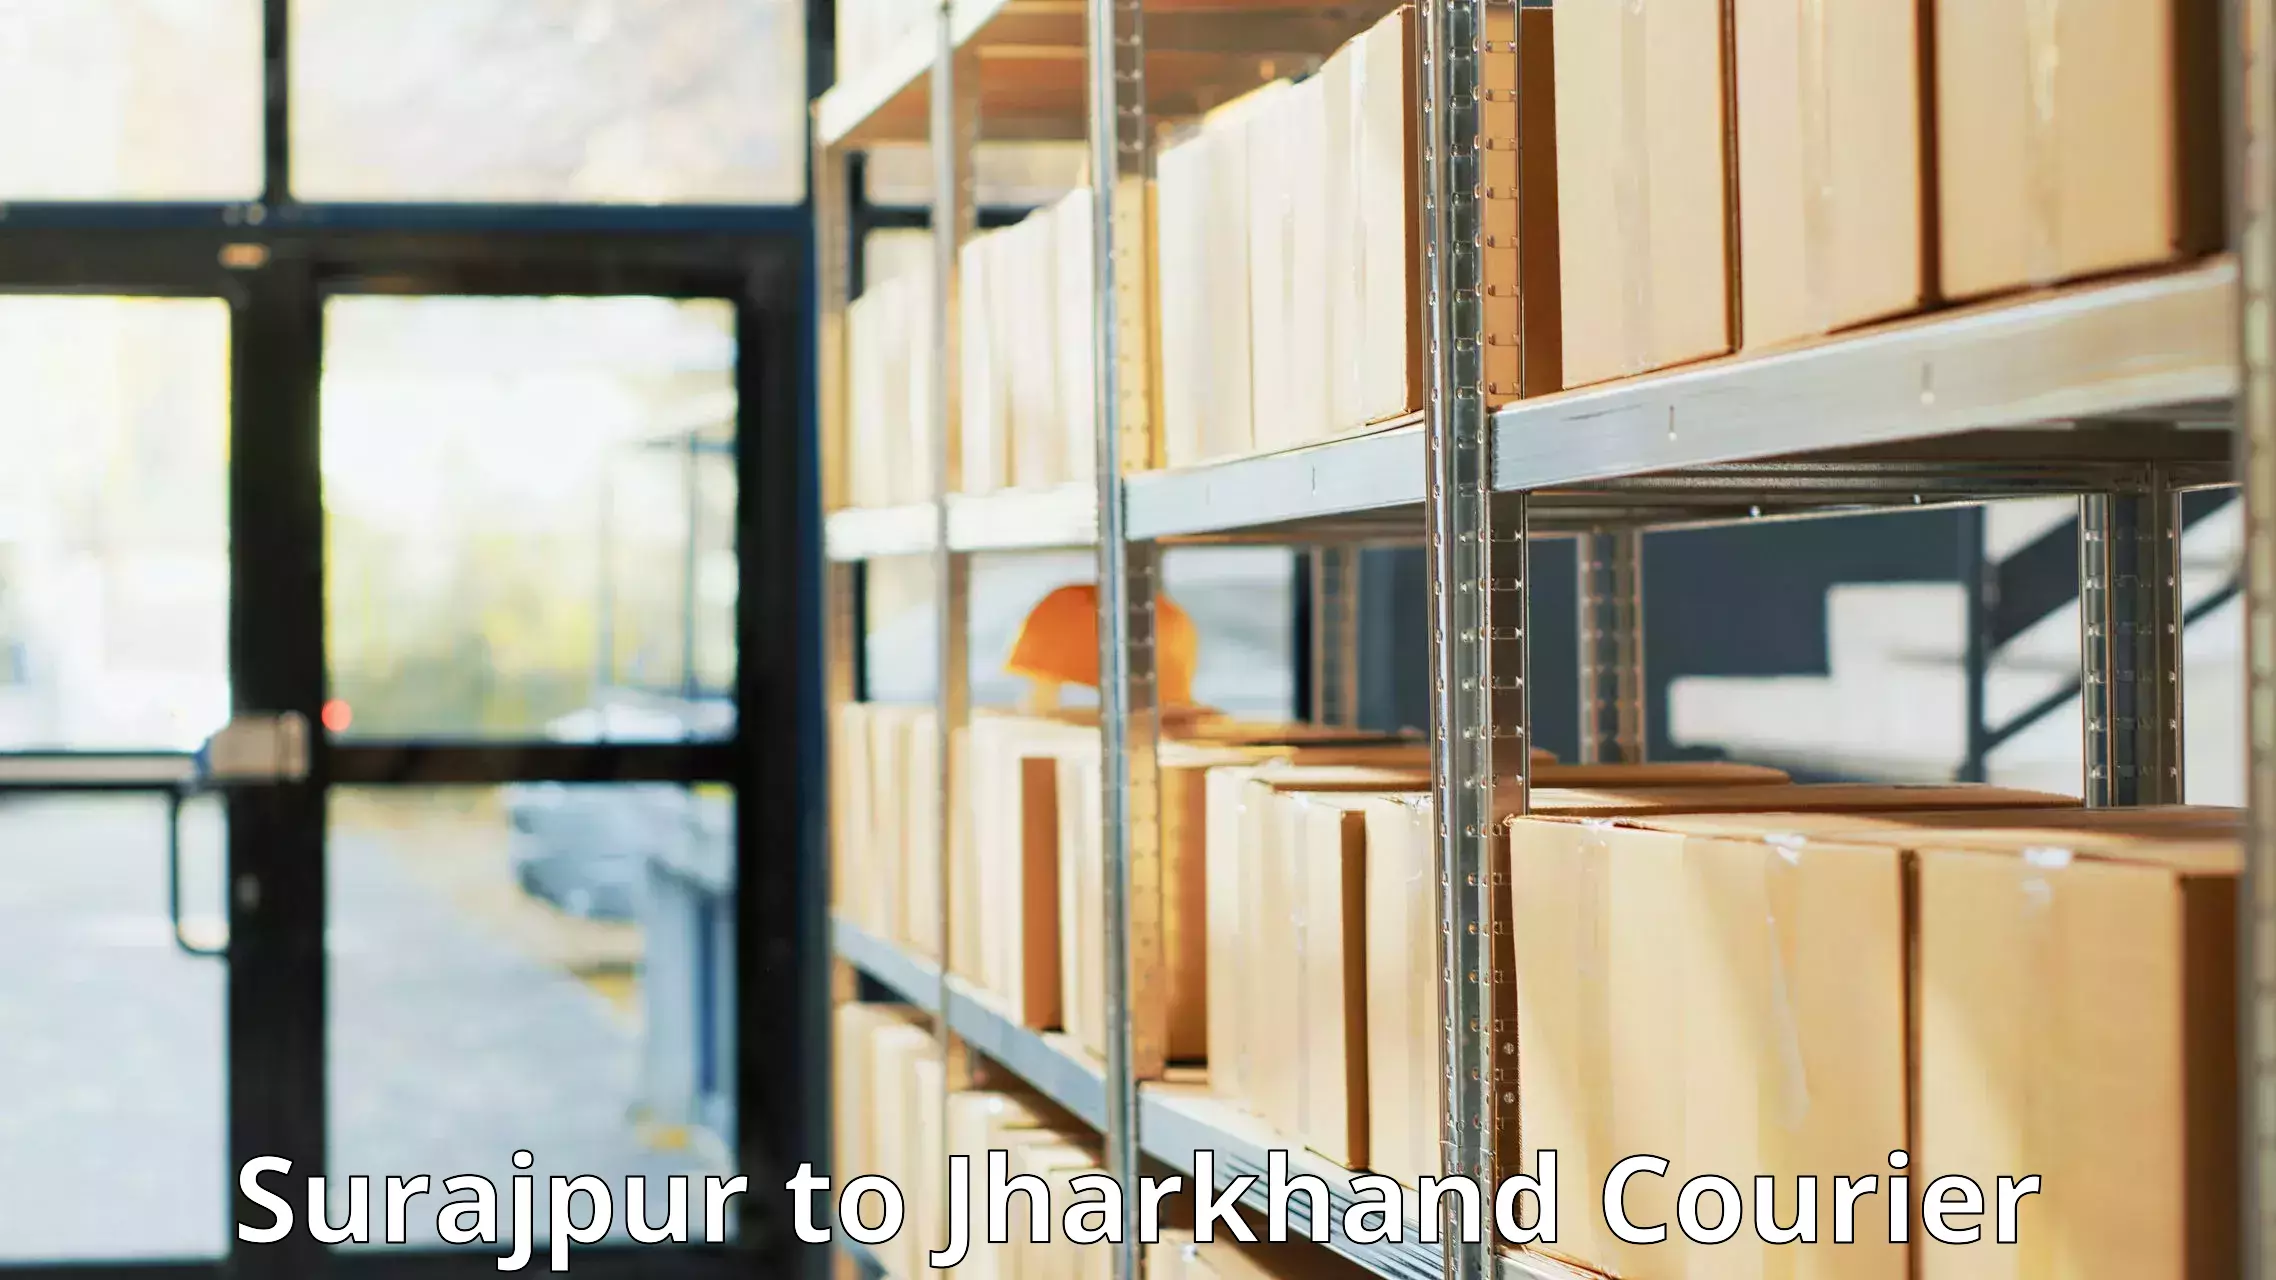 Courier service innovation Surajpur to Jamshedpur